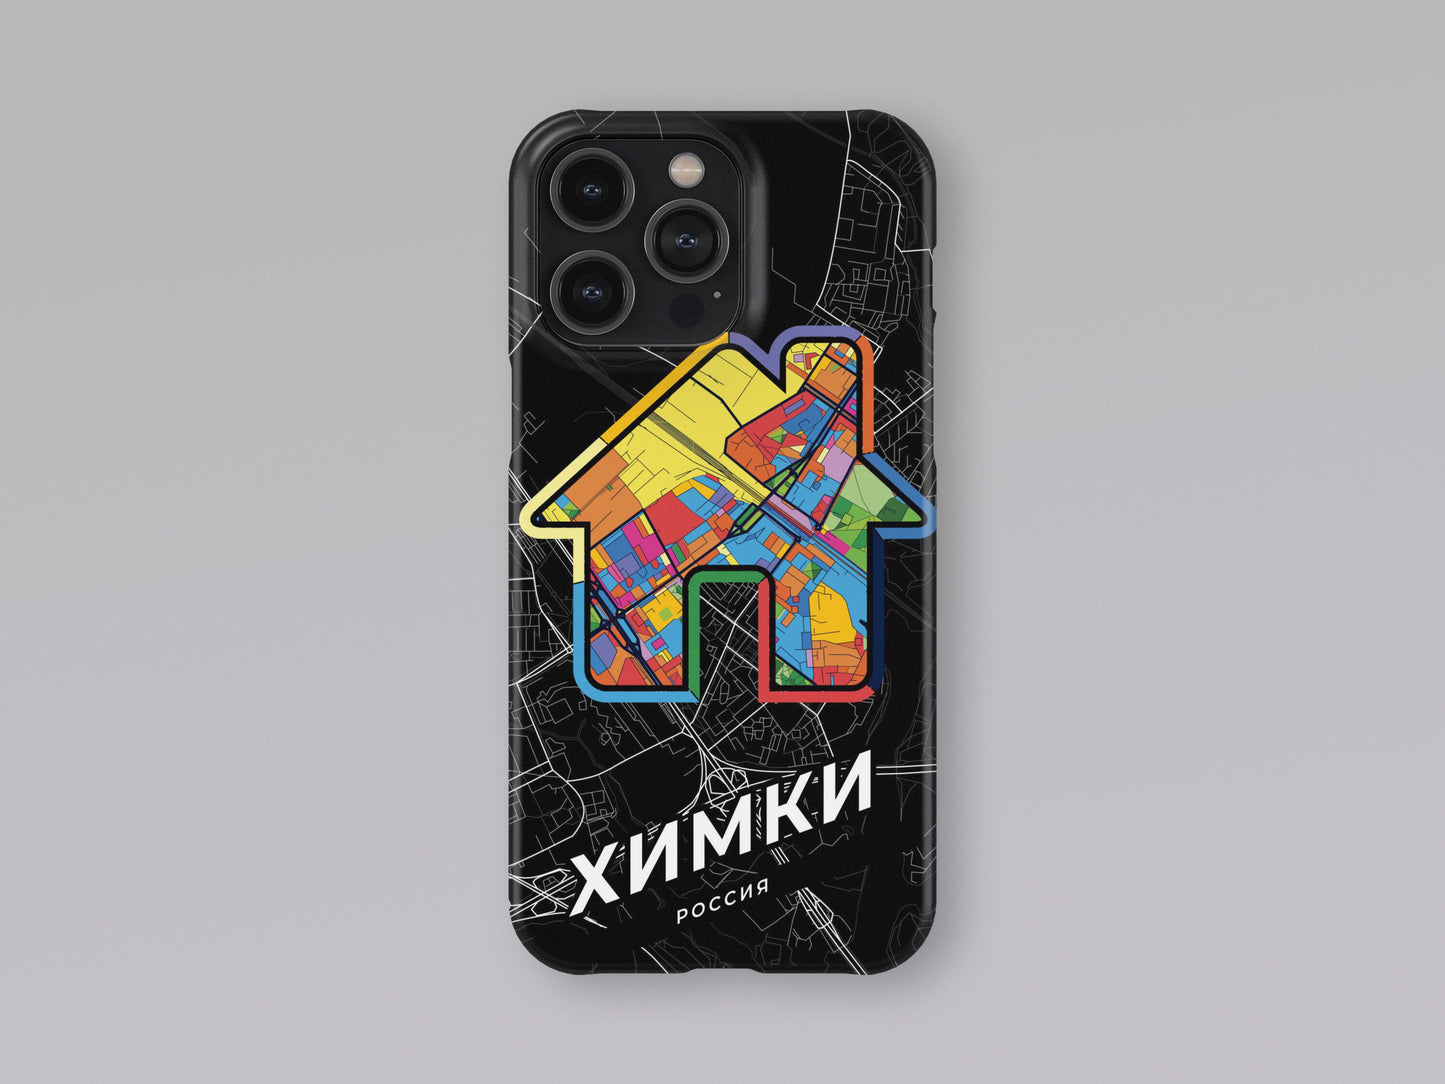 Khimki Russia slim phone case with colorful icon. Birthday, wedding or housewarming gift. Couple match cases. 3